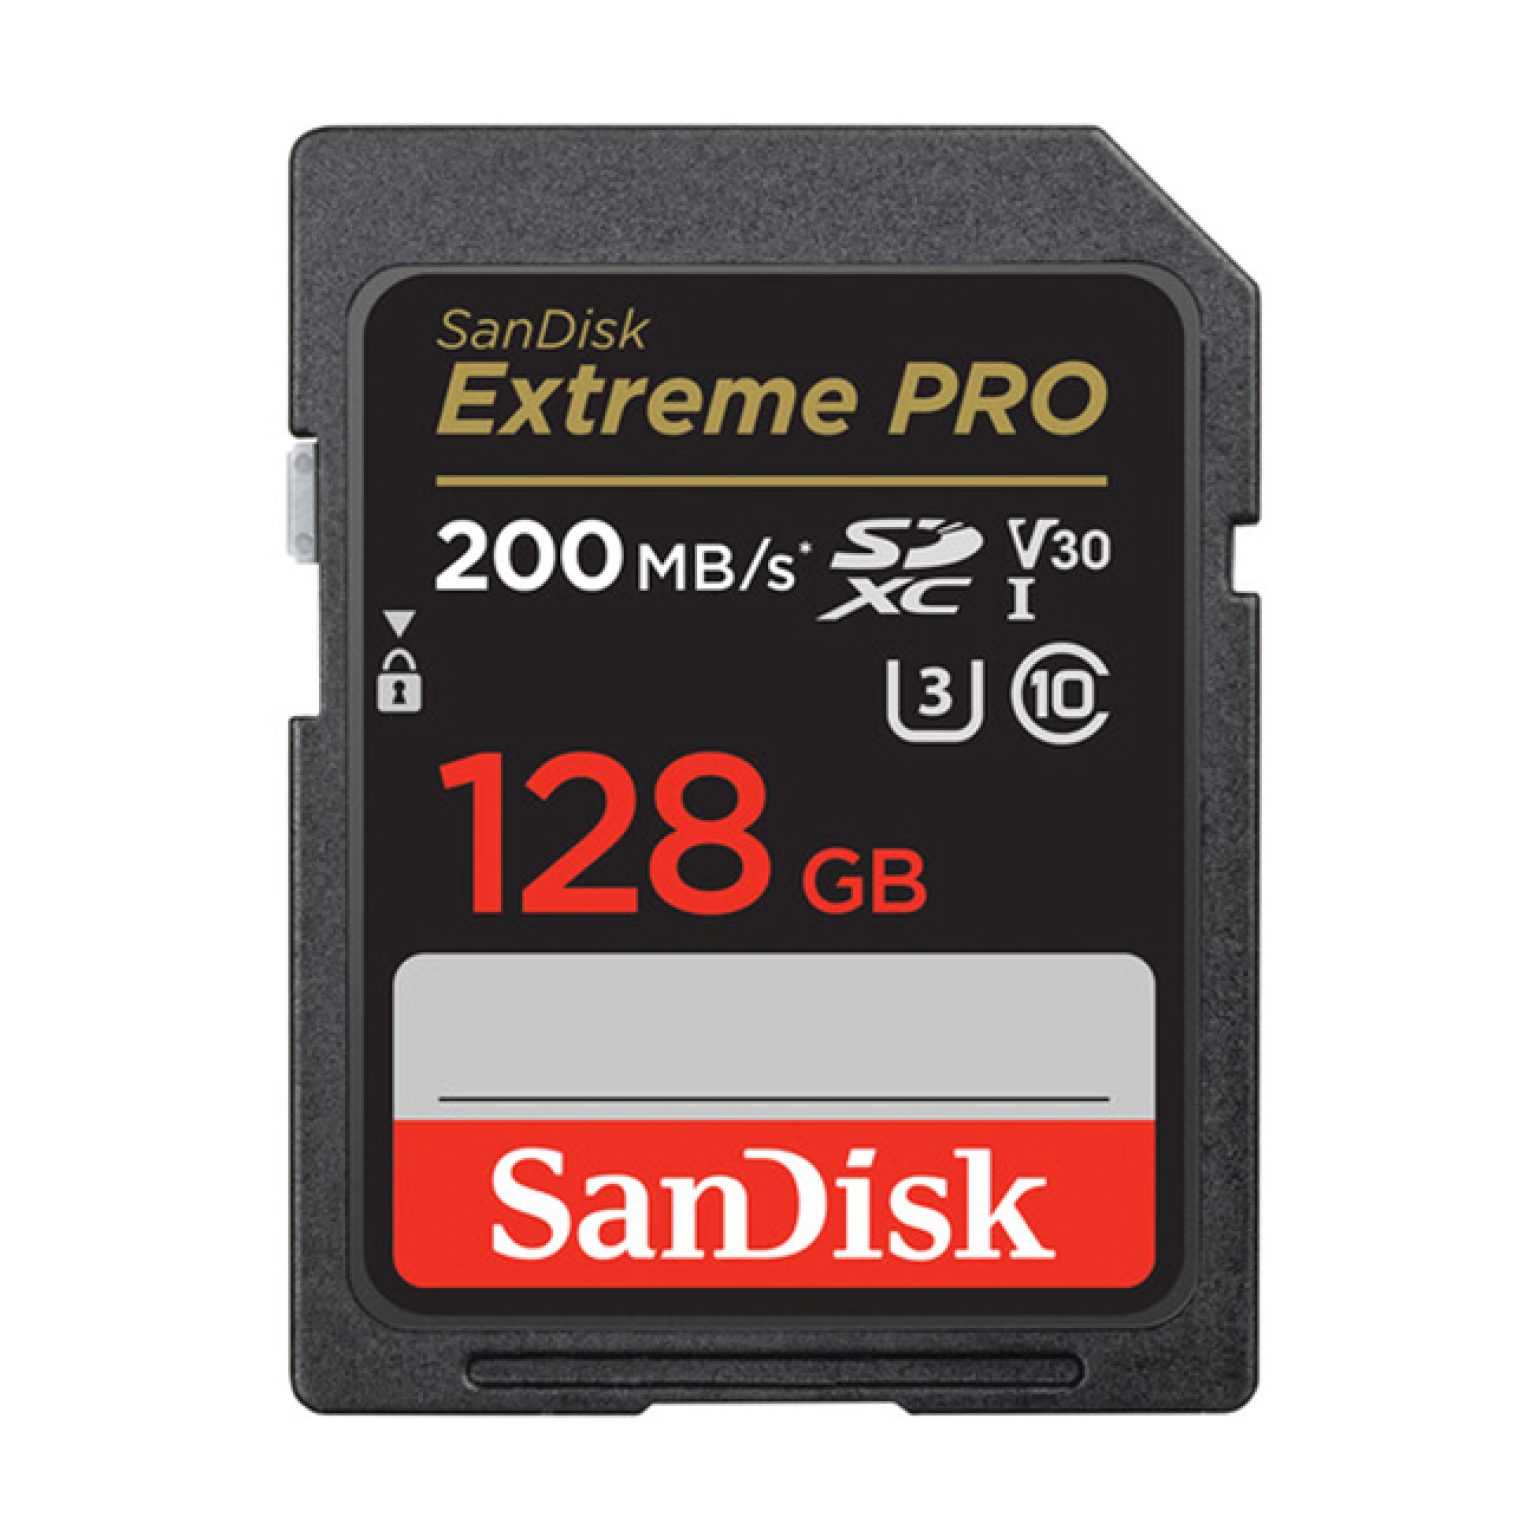 SanDisk 128GB 200 MB s Extreme PRO UHS I SDHC Memory Card 4